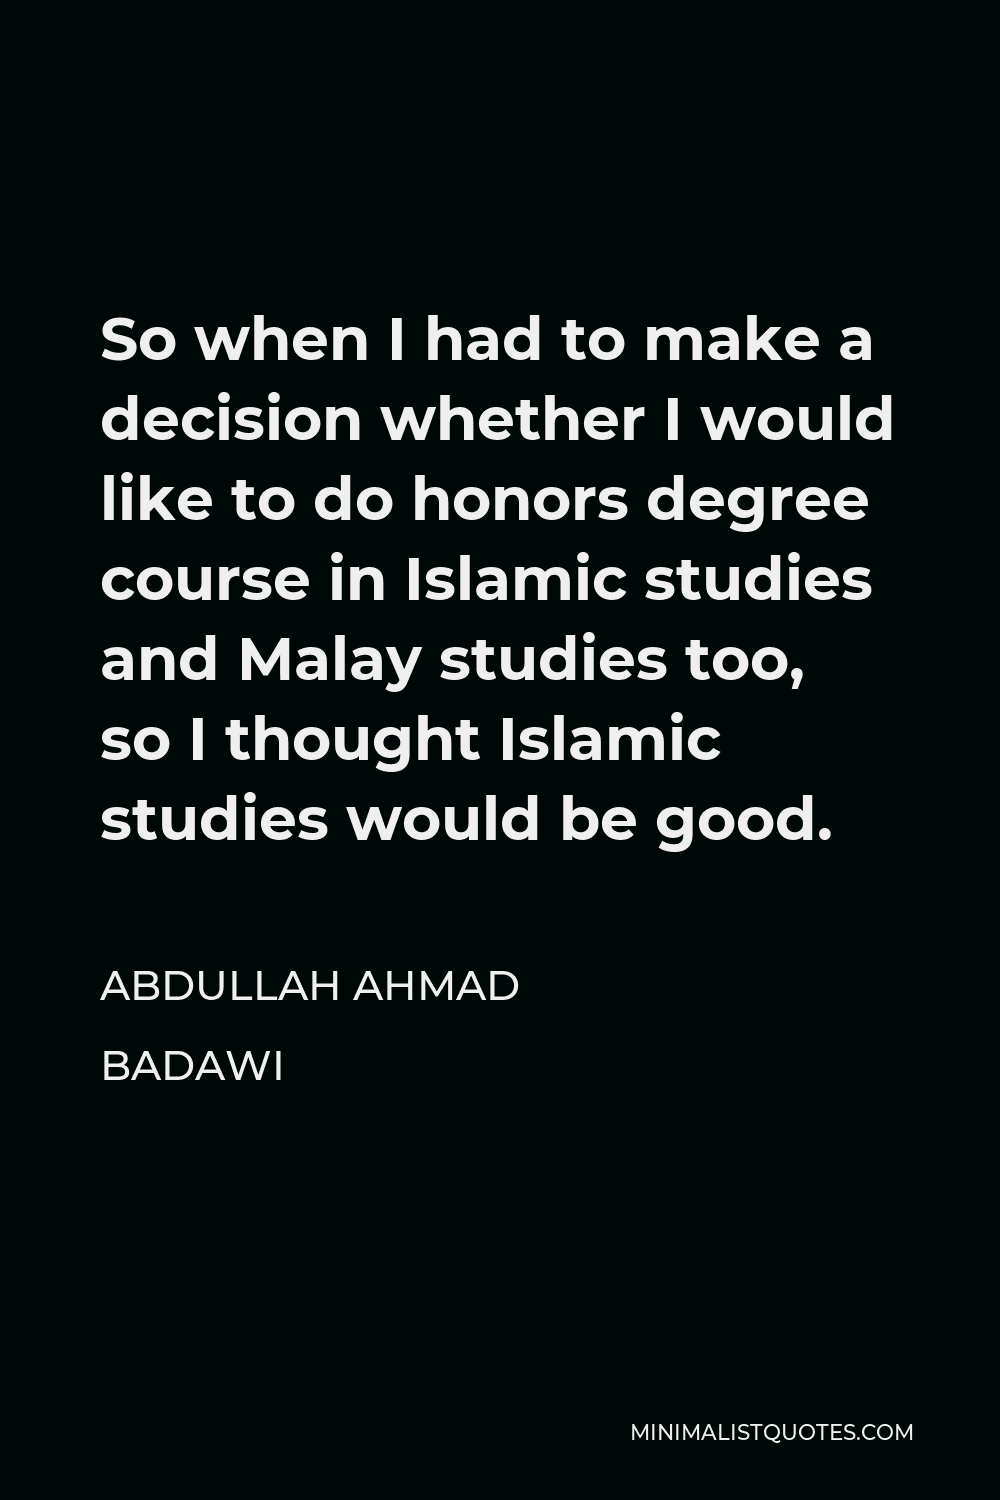 Abdullah Ahmad Badawi Quote - So when I had to make a decision whether I would like to do honors degree course in Islamic studies and Malay studies too, so I thought Islamic studies would be good.